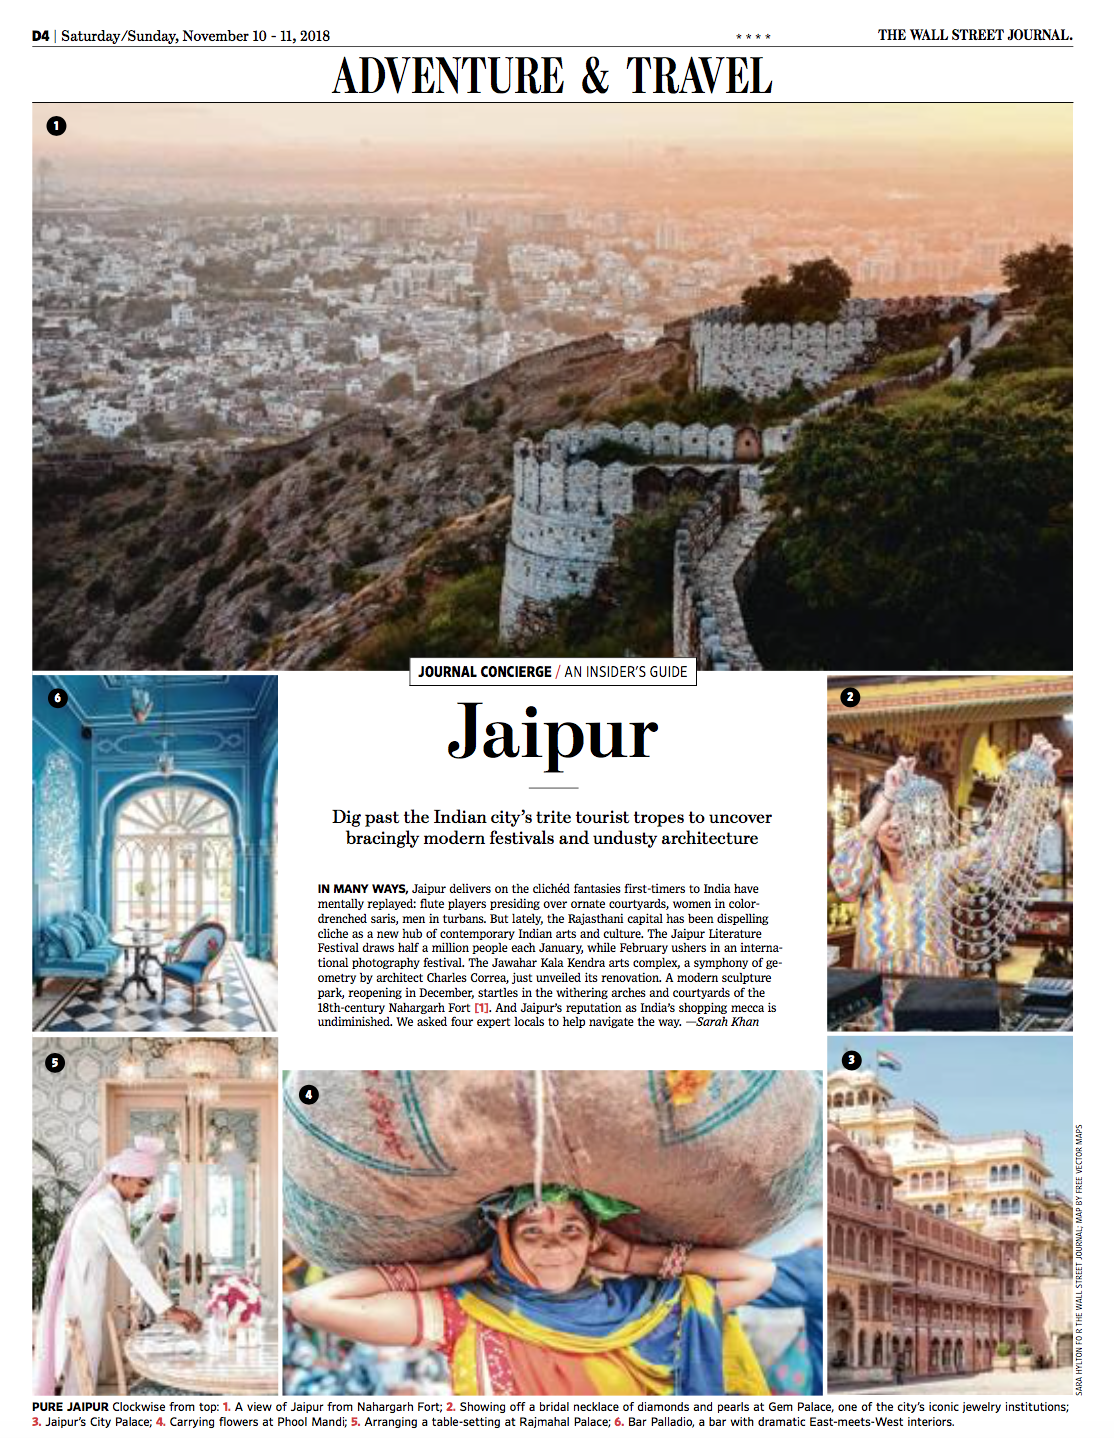 Wall Street Journal: Insider’s Guide to Jaipur